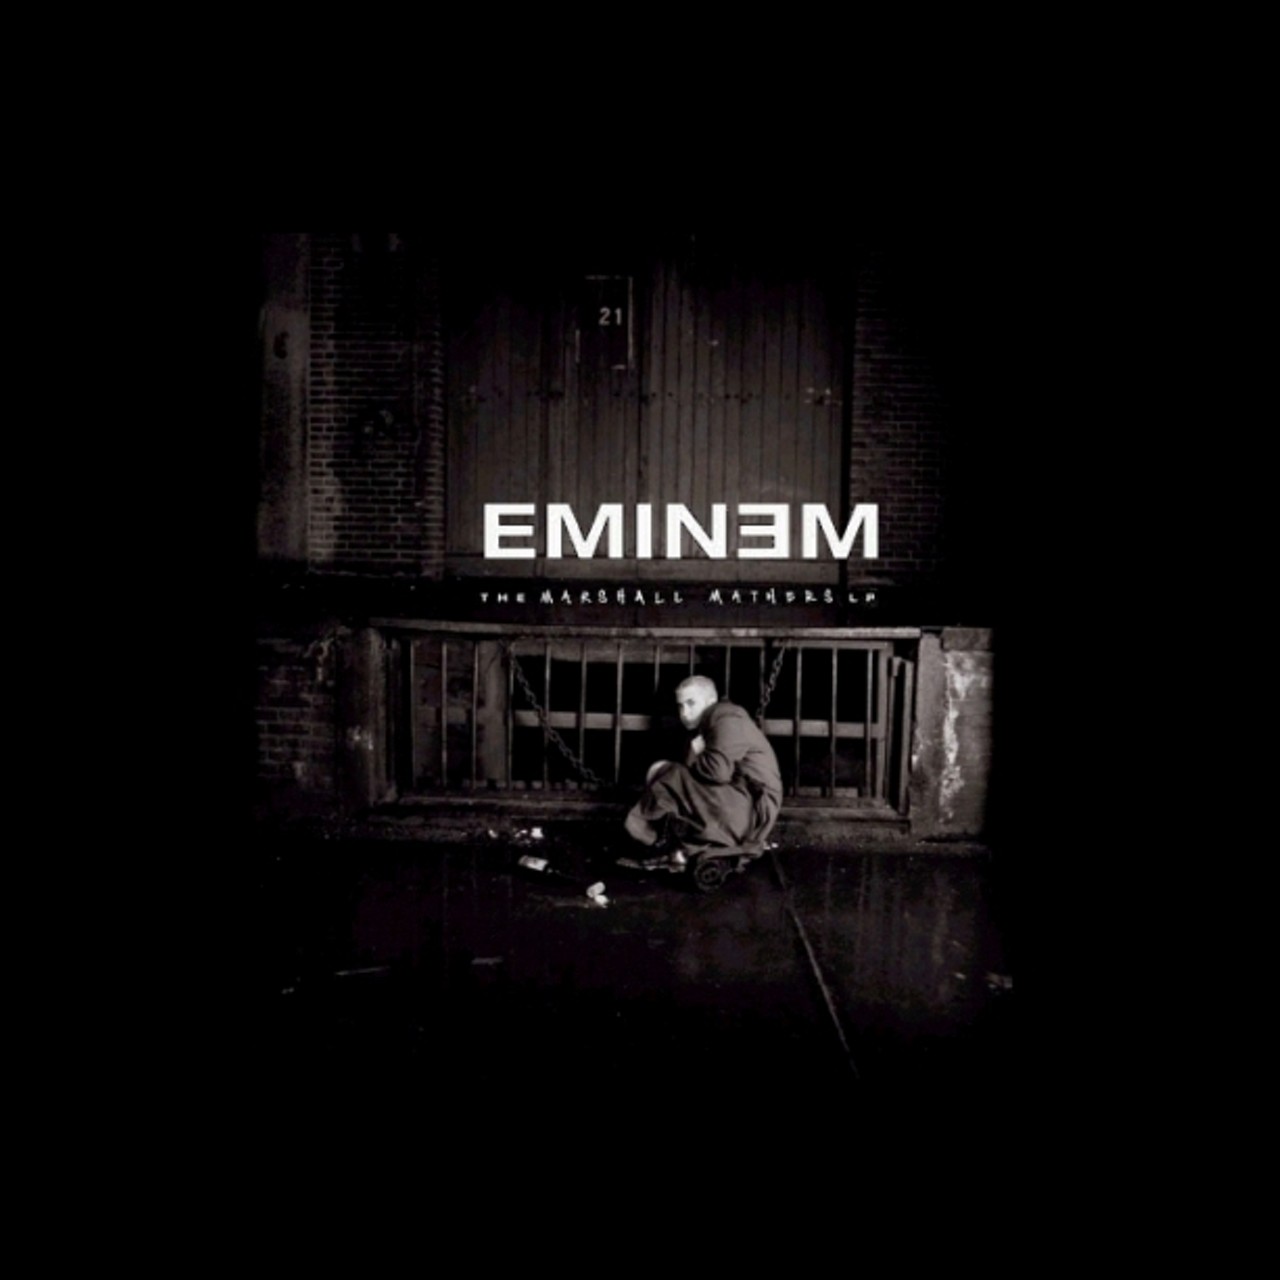 Eminem &#150; The Marshall Mathers LP
If Big L is not your style, try Eminem, another gifted freestyle rapper whose brain would probably make an intriguing study.
